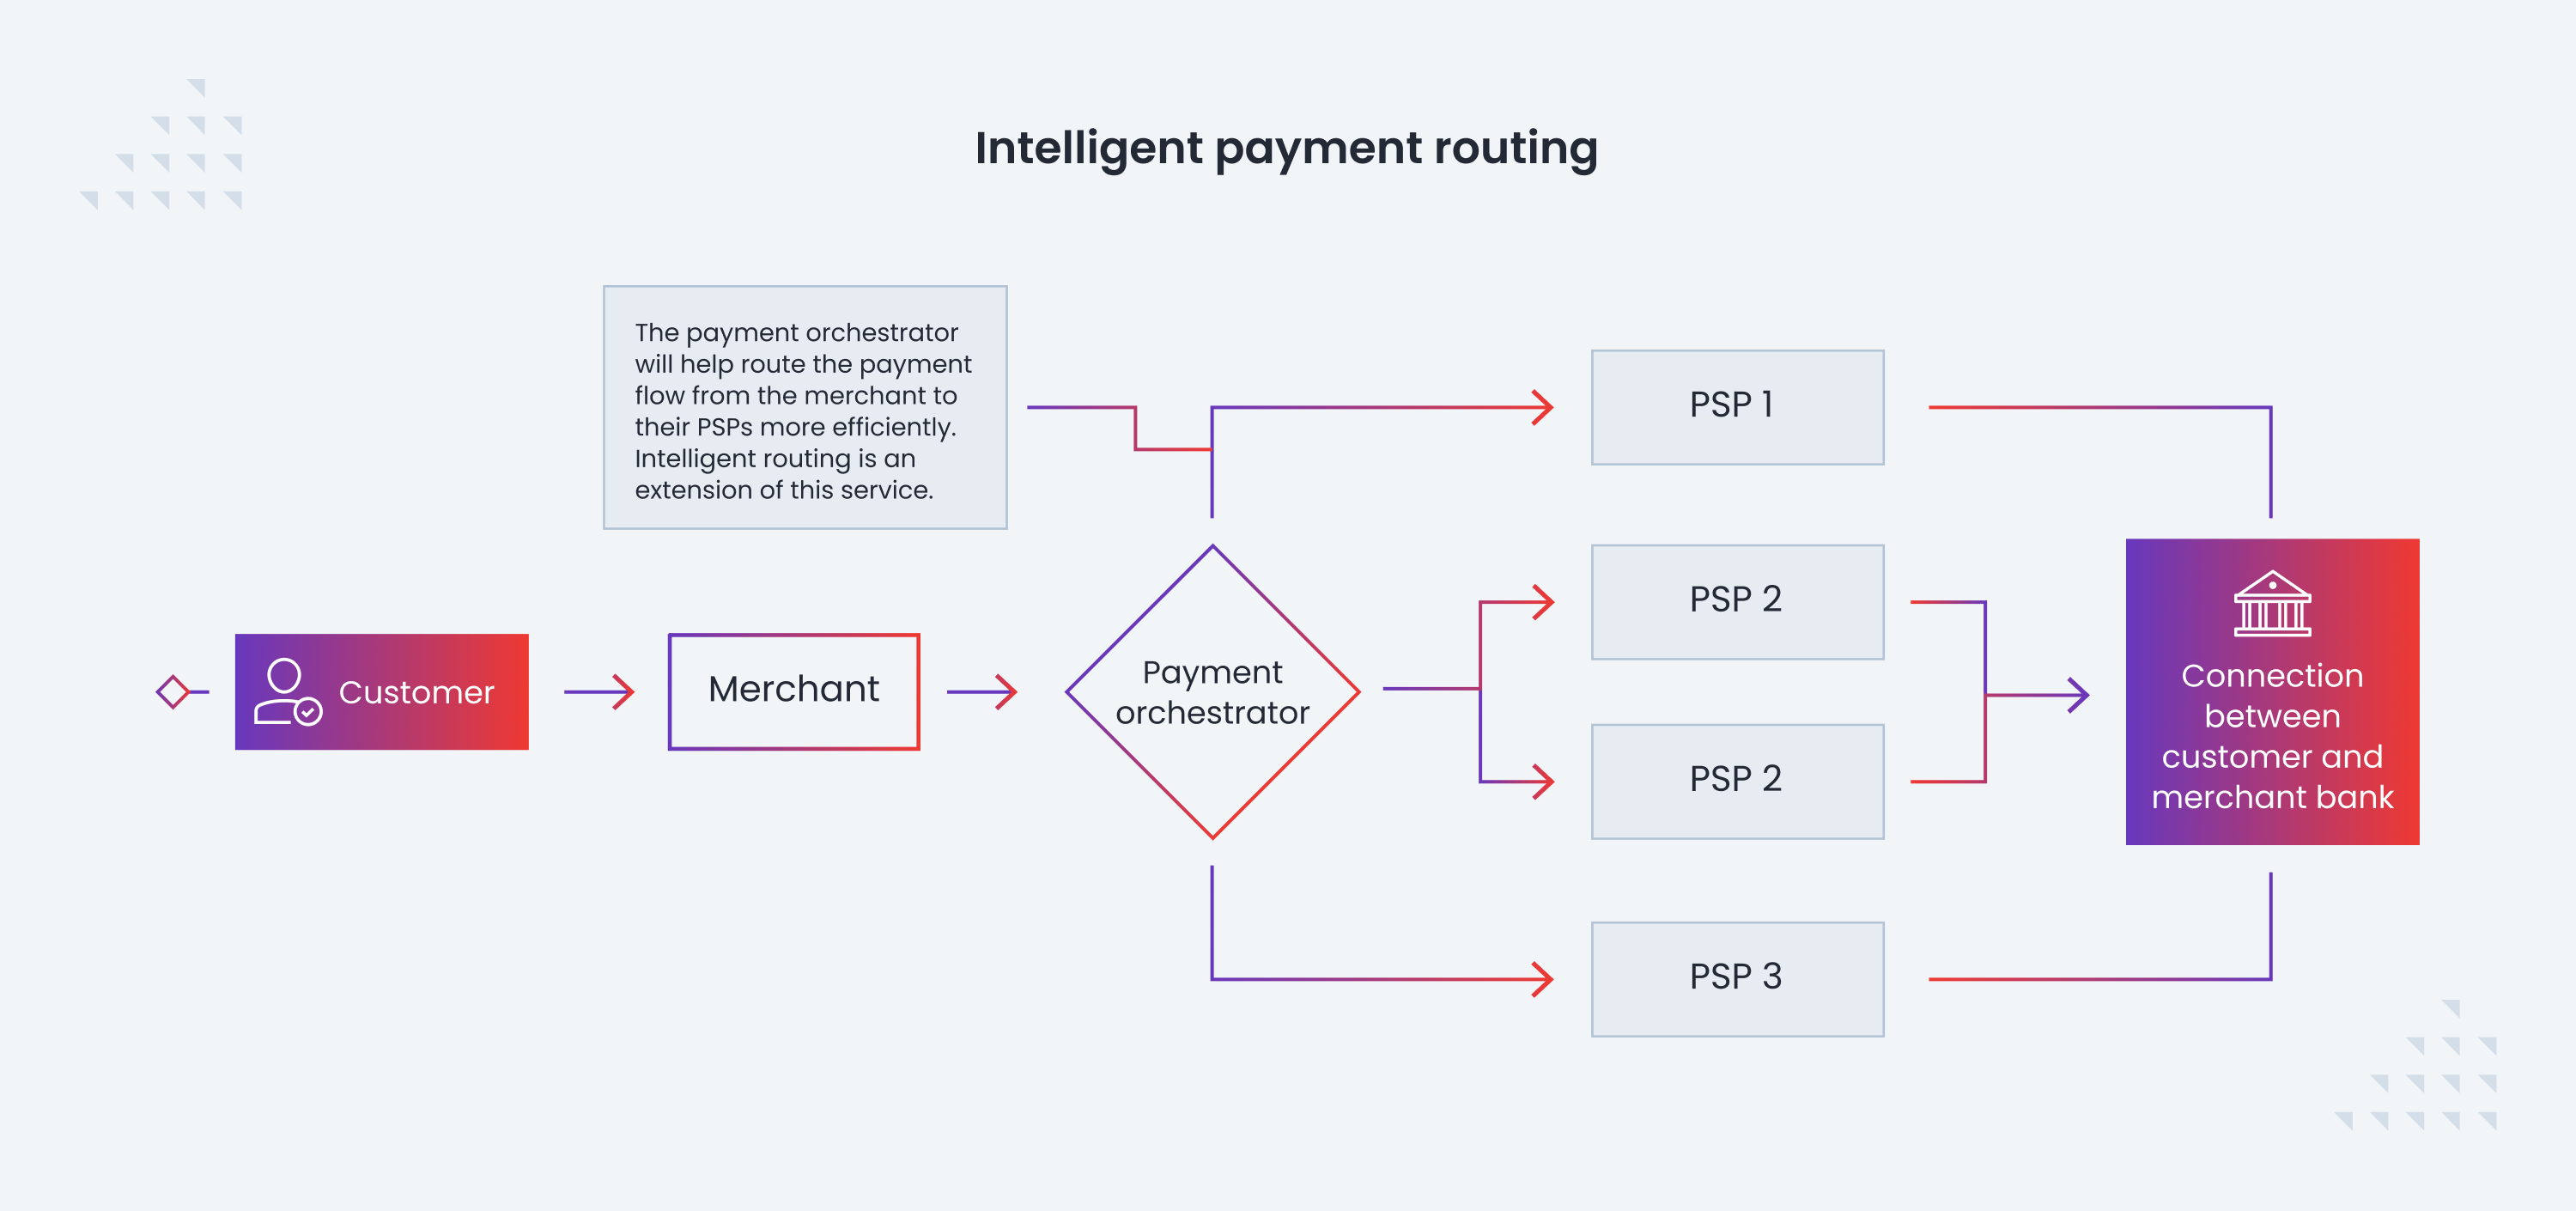 Intelligent payment routing